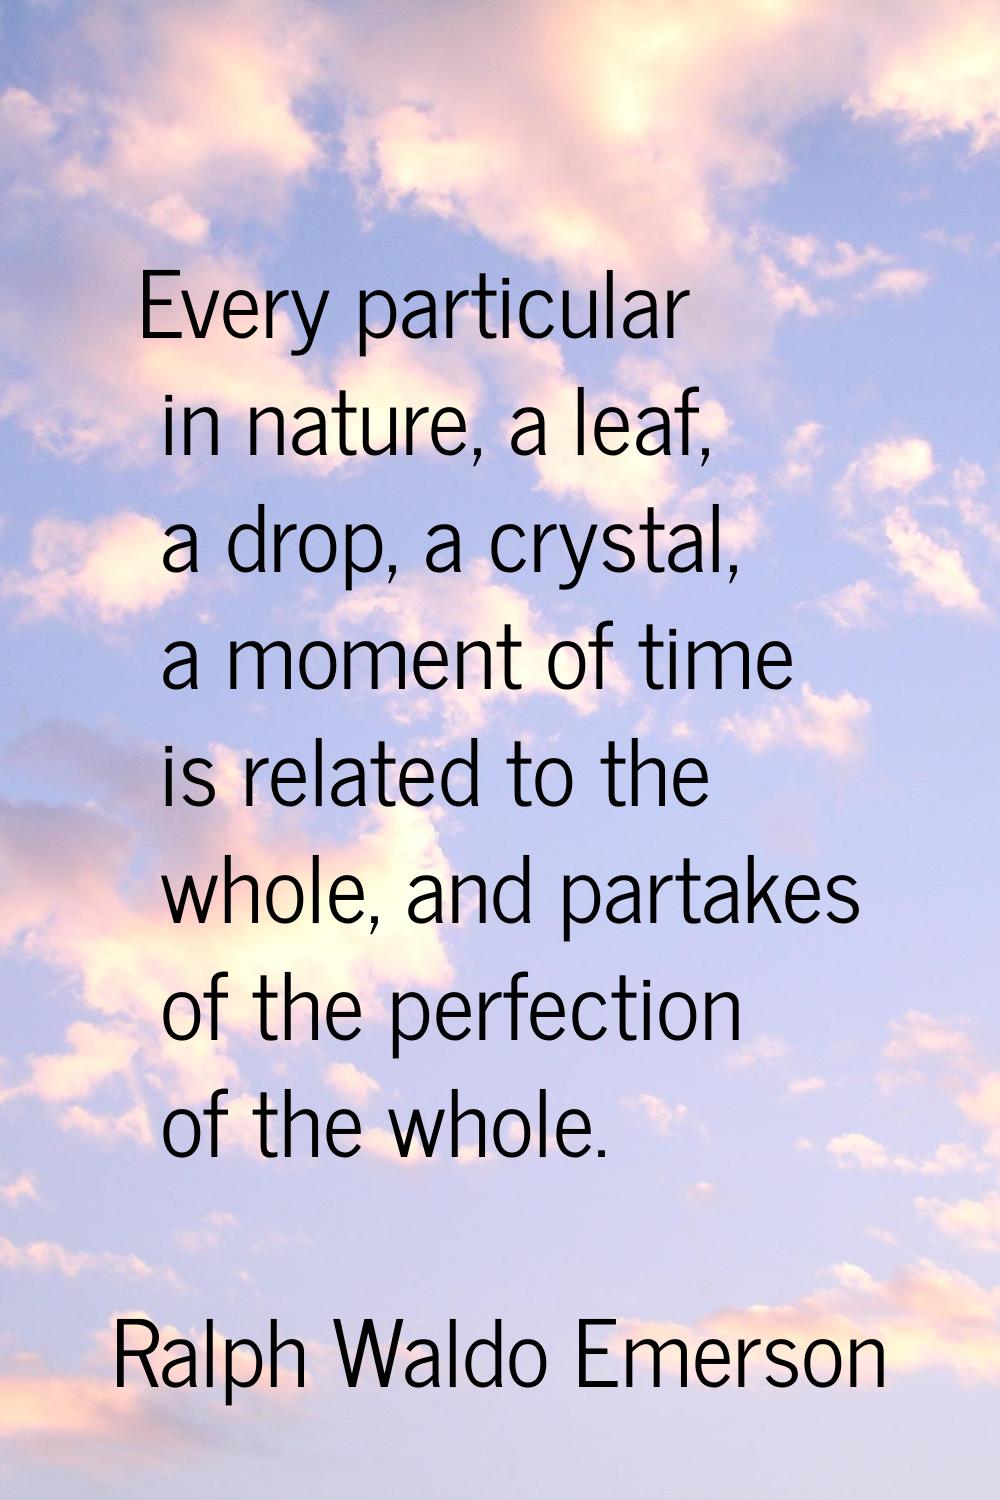 Every particular in nature, a leaf, a drop, a crystal, a moment of time is related to the whole, an